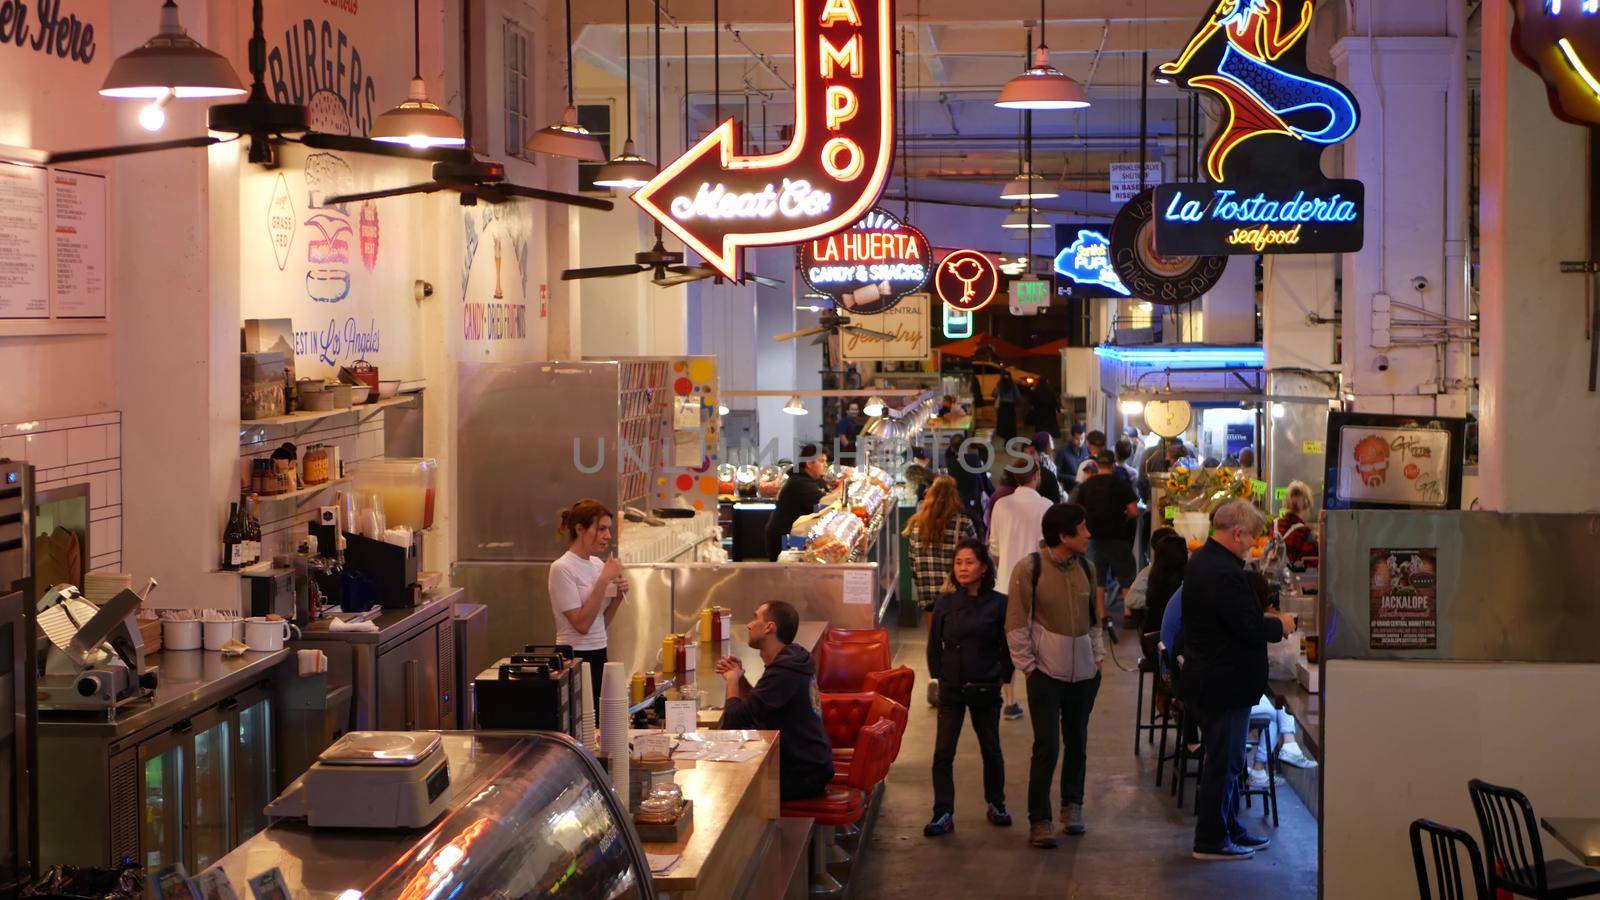 LOS ANGELES, CALIFORNIA, USA - 27 OCT 2019: Grand central market street lunch shops with diversity of glowing retro neon signs. Multiracial people on foodcourt. Citizens dining with fast food in LA.